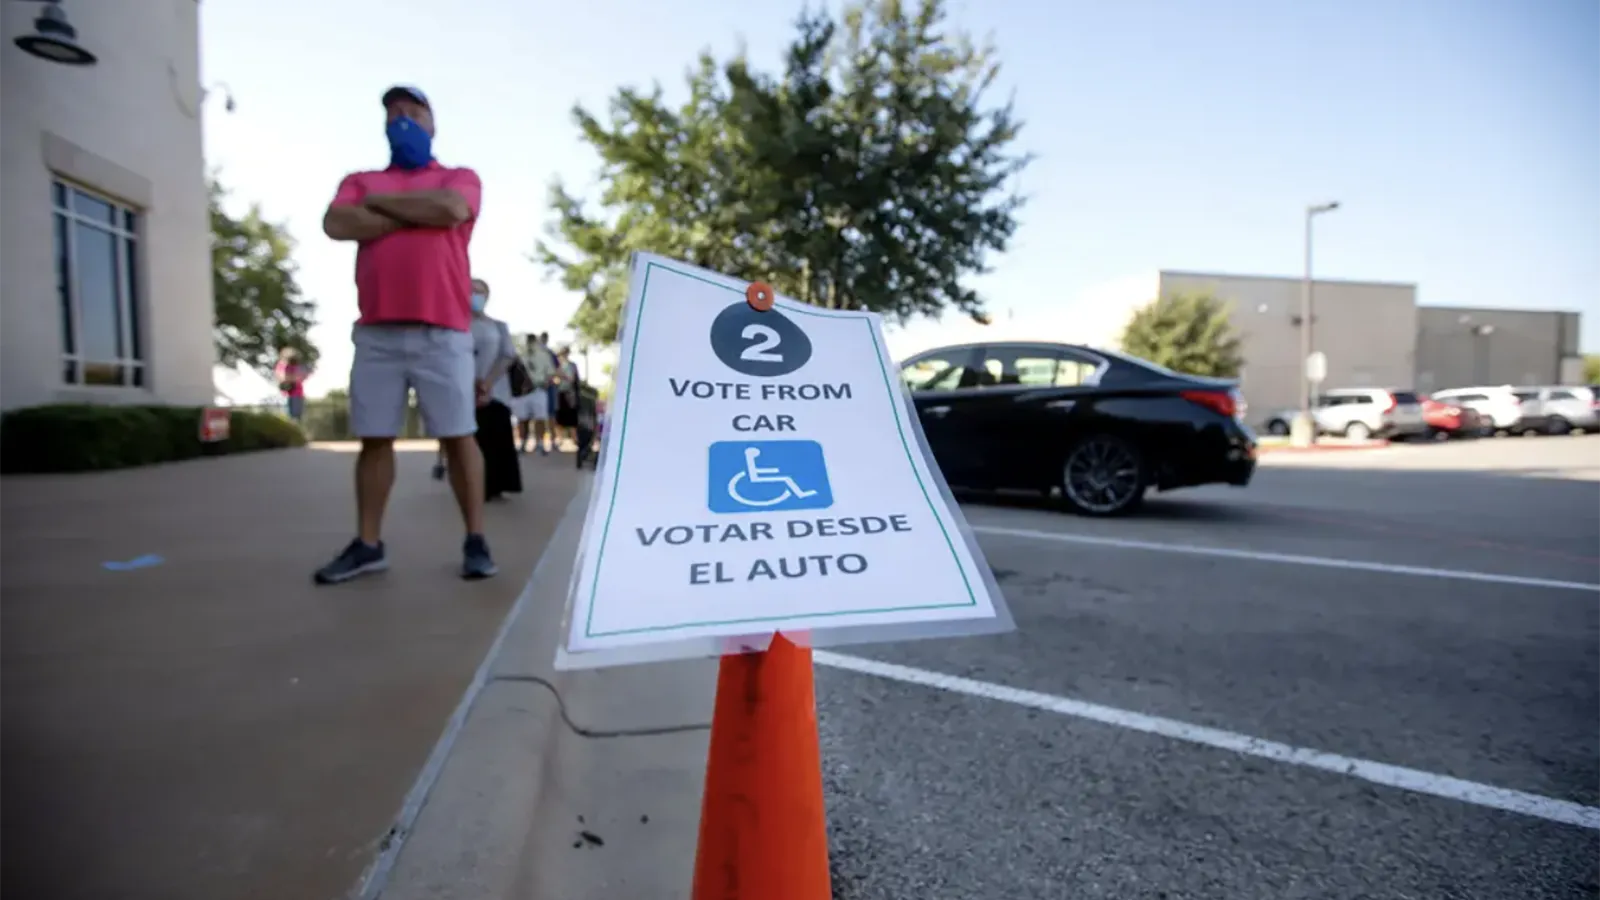 Every county is required to offer curbside voting to any voter whose health would be harmed by entering the polls, or who is physically incapable of doing so. Credit: Miguel Gutierrez Jr./The Texas Tribune